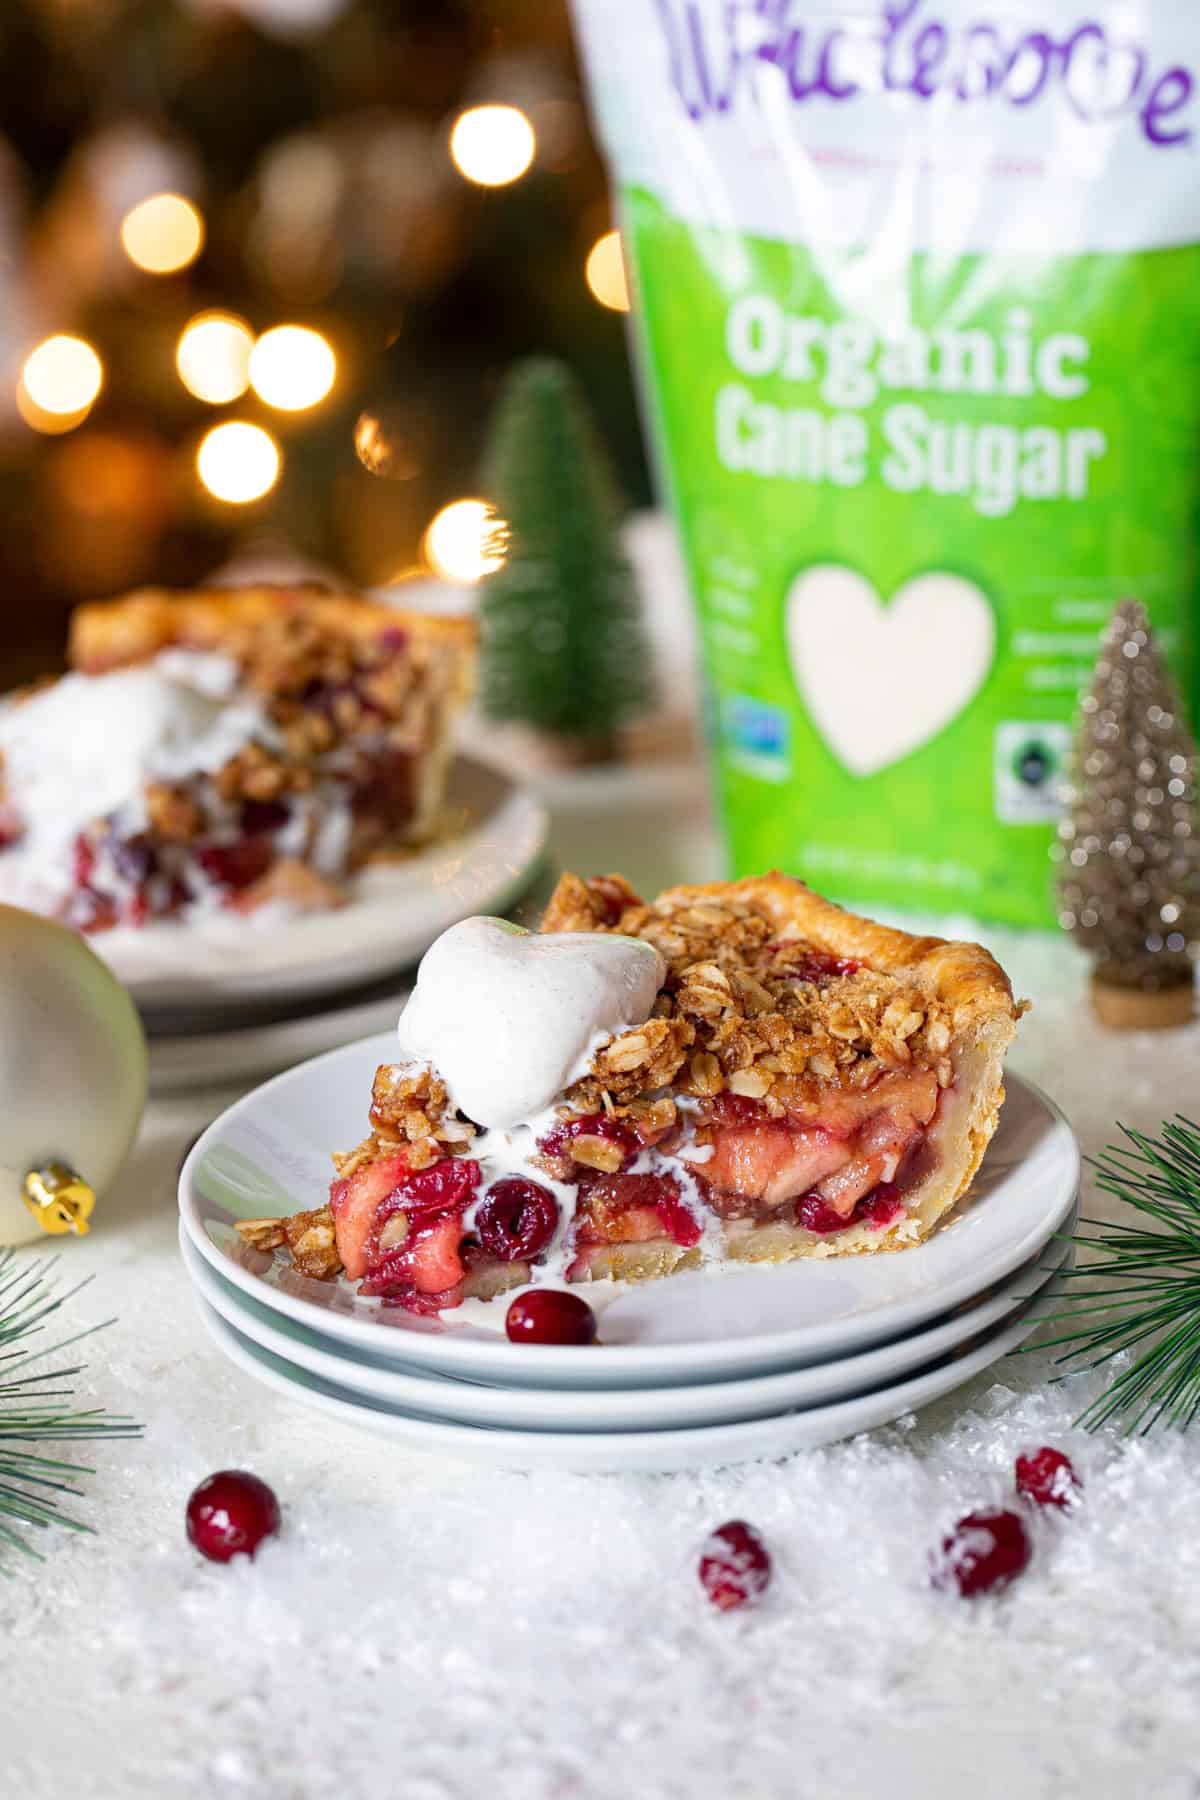 Slice of vegan apple cranberry crumble pie in front of a bag of organic cane sugar